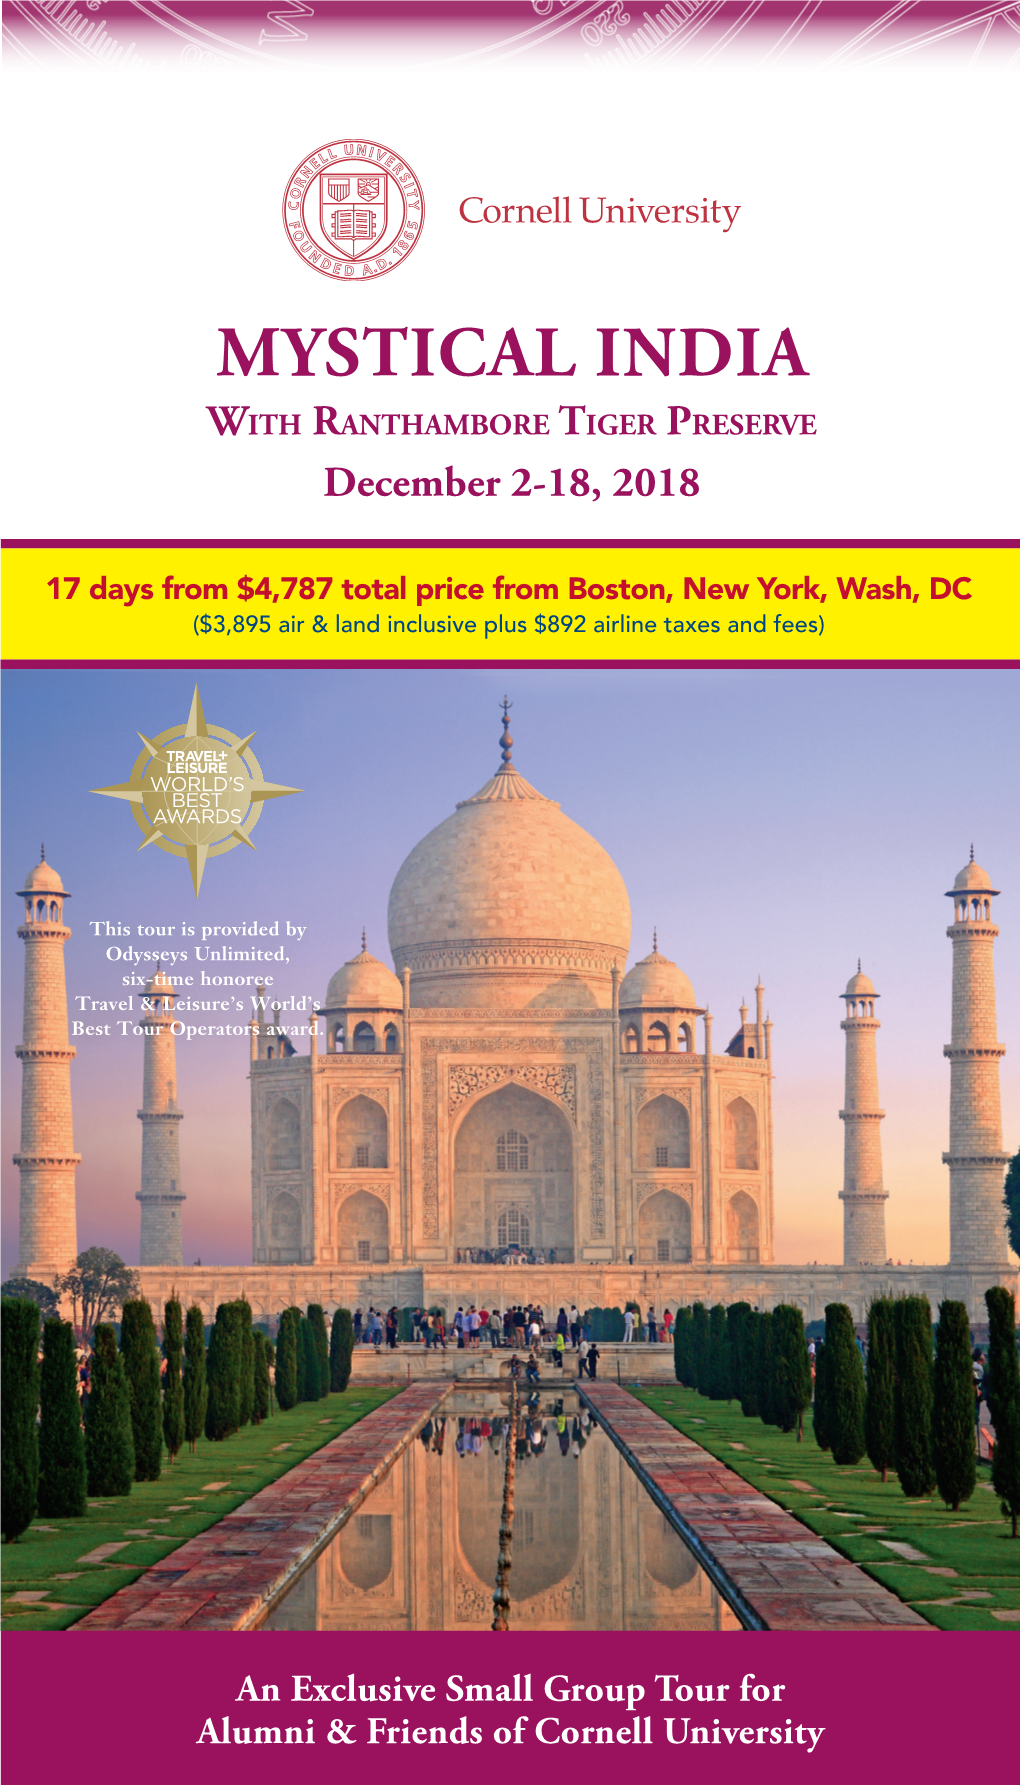 MYSTICAL INDIA with Ranthambore Tiger Preserve December 2-18, 2018